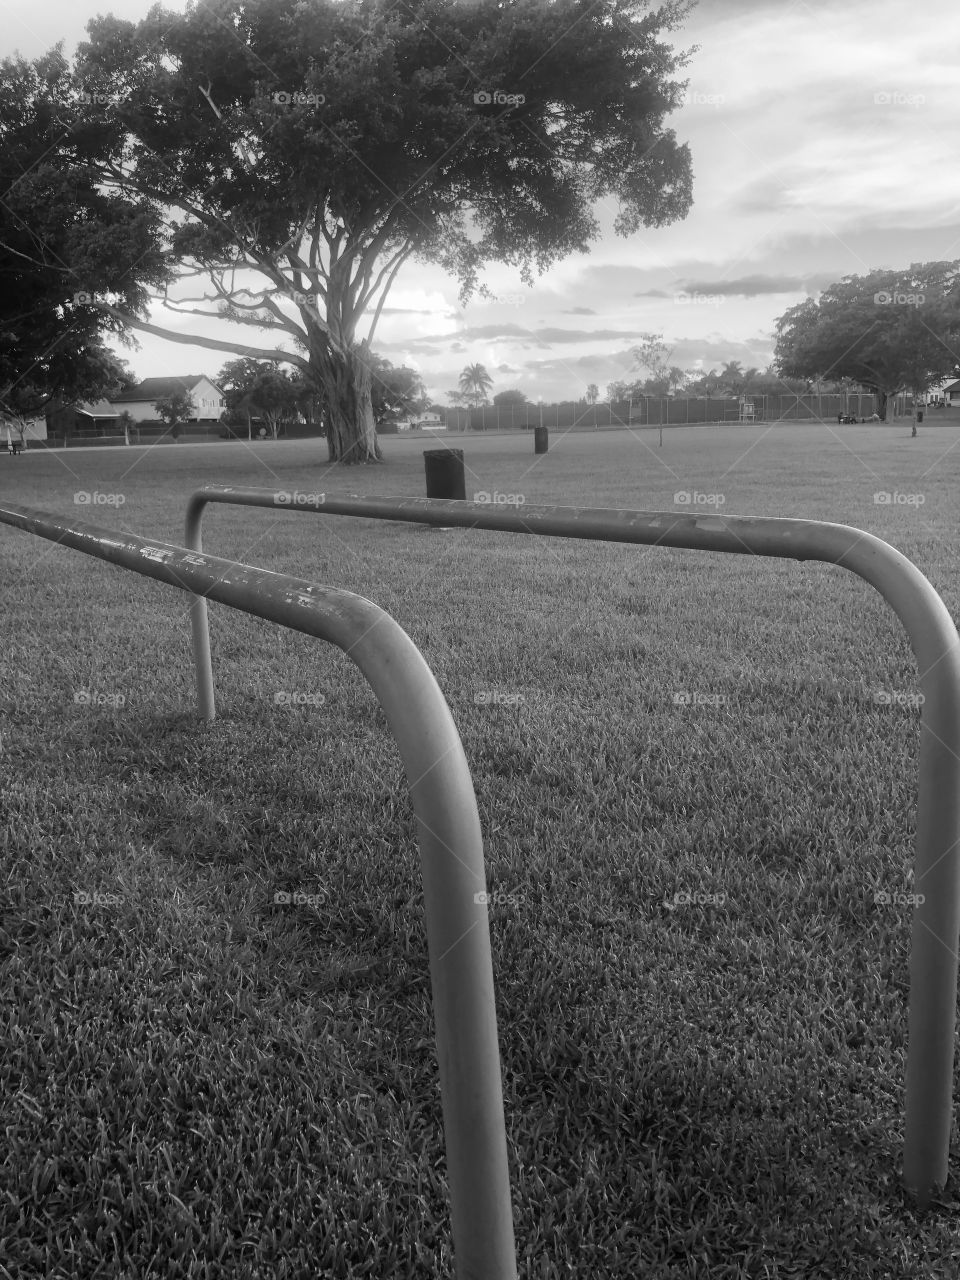 Parallel bars at the park in black and white